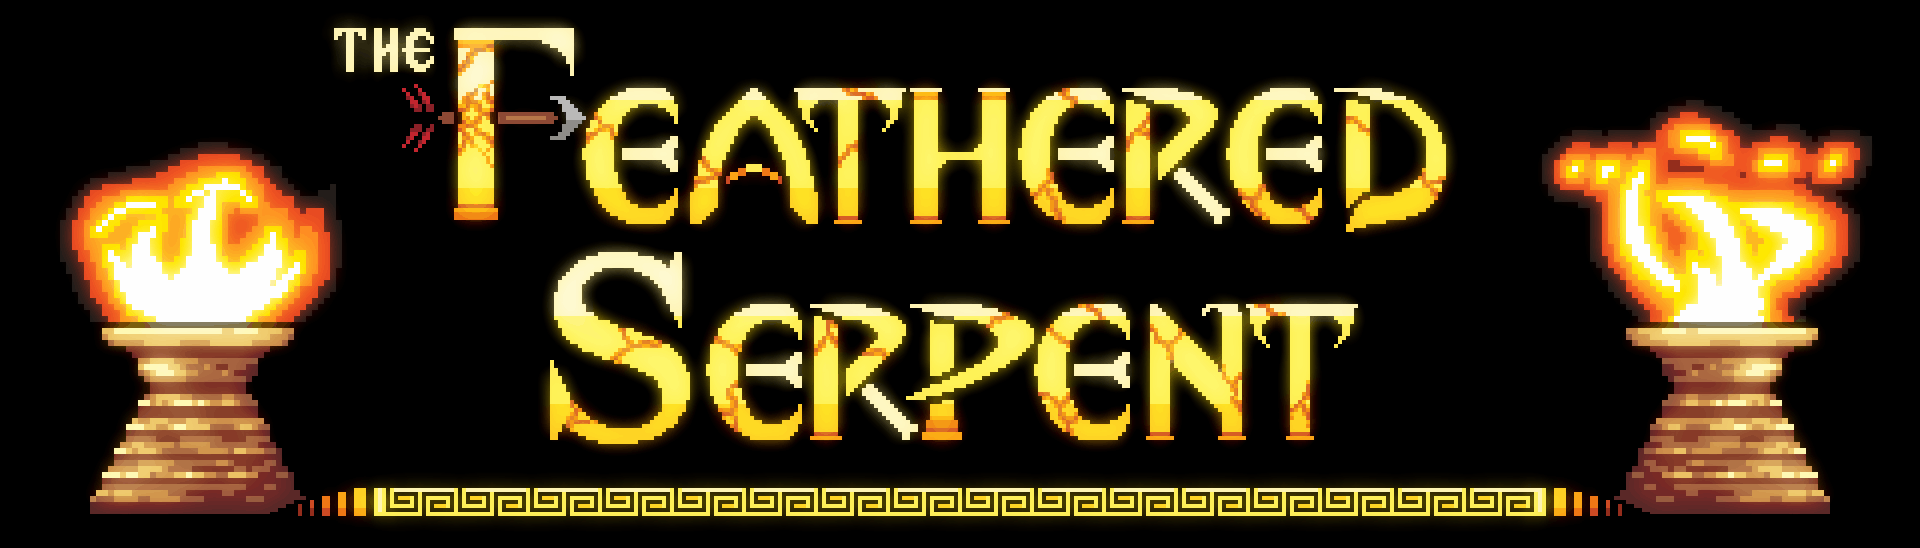 The Feathered Serpent Demo